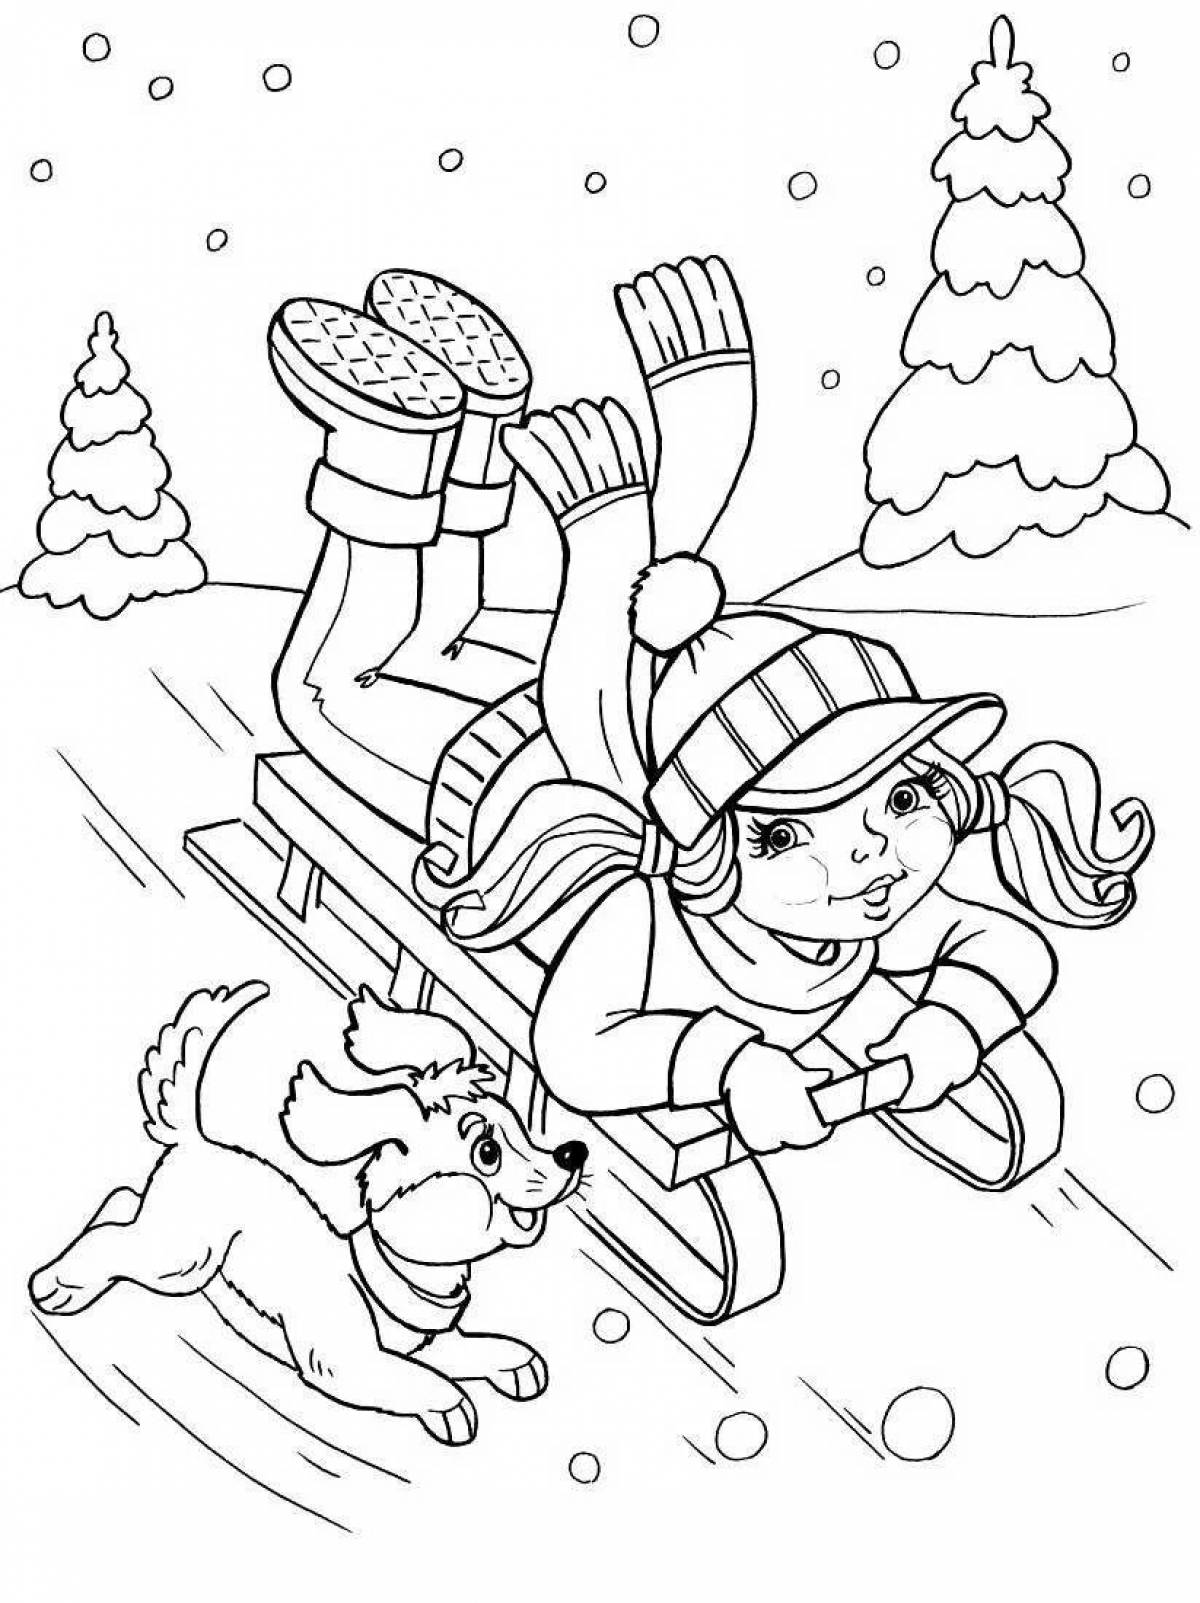 Winter holidays for kids #9